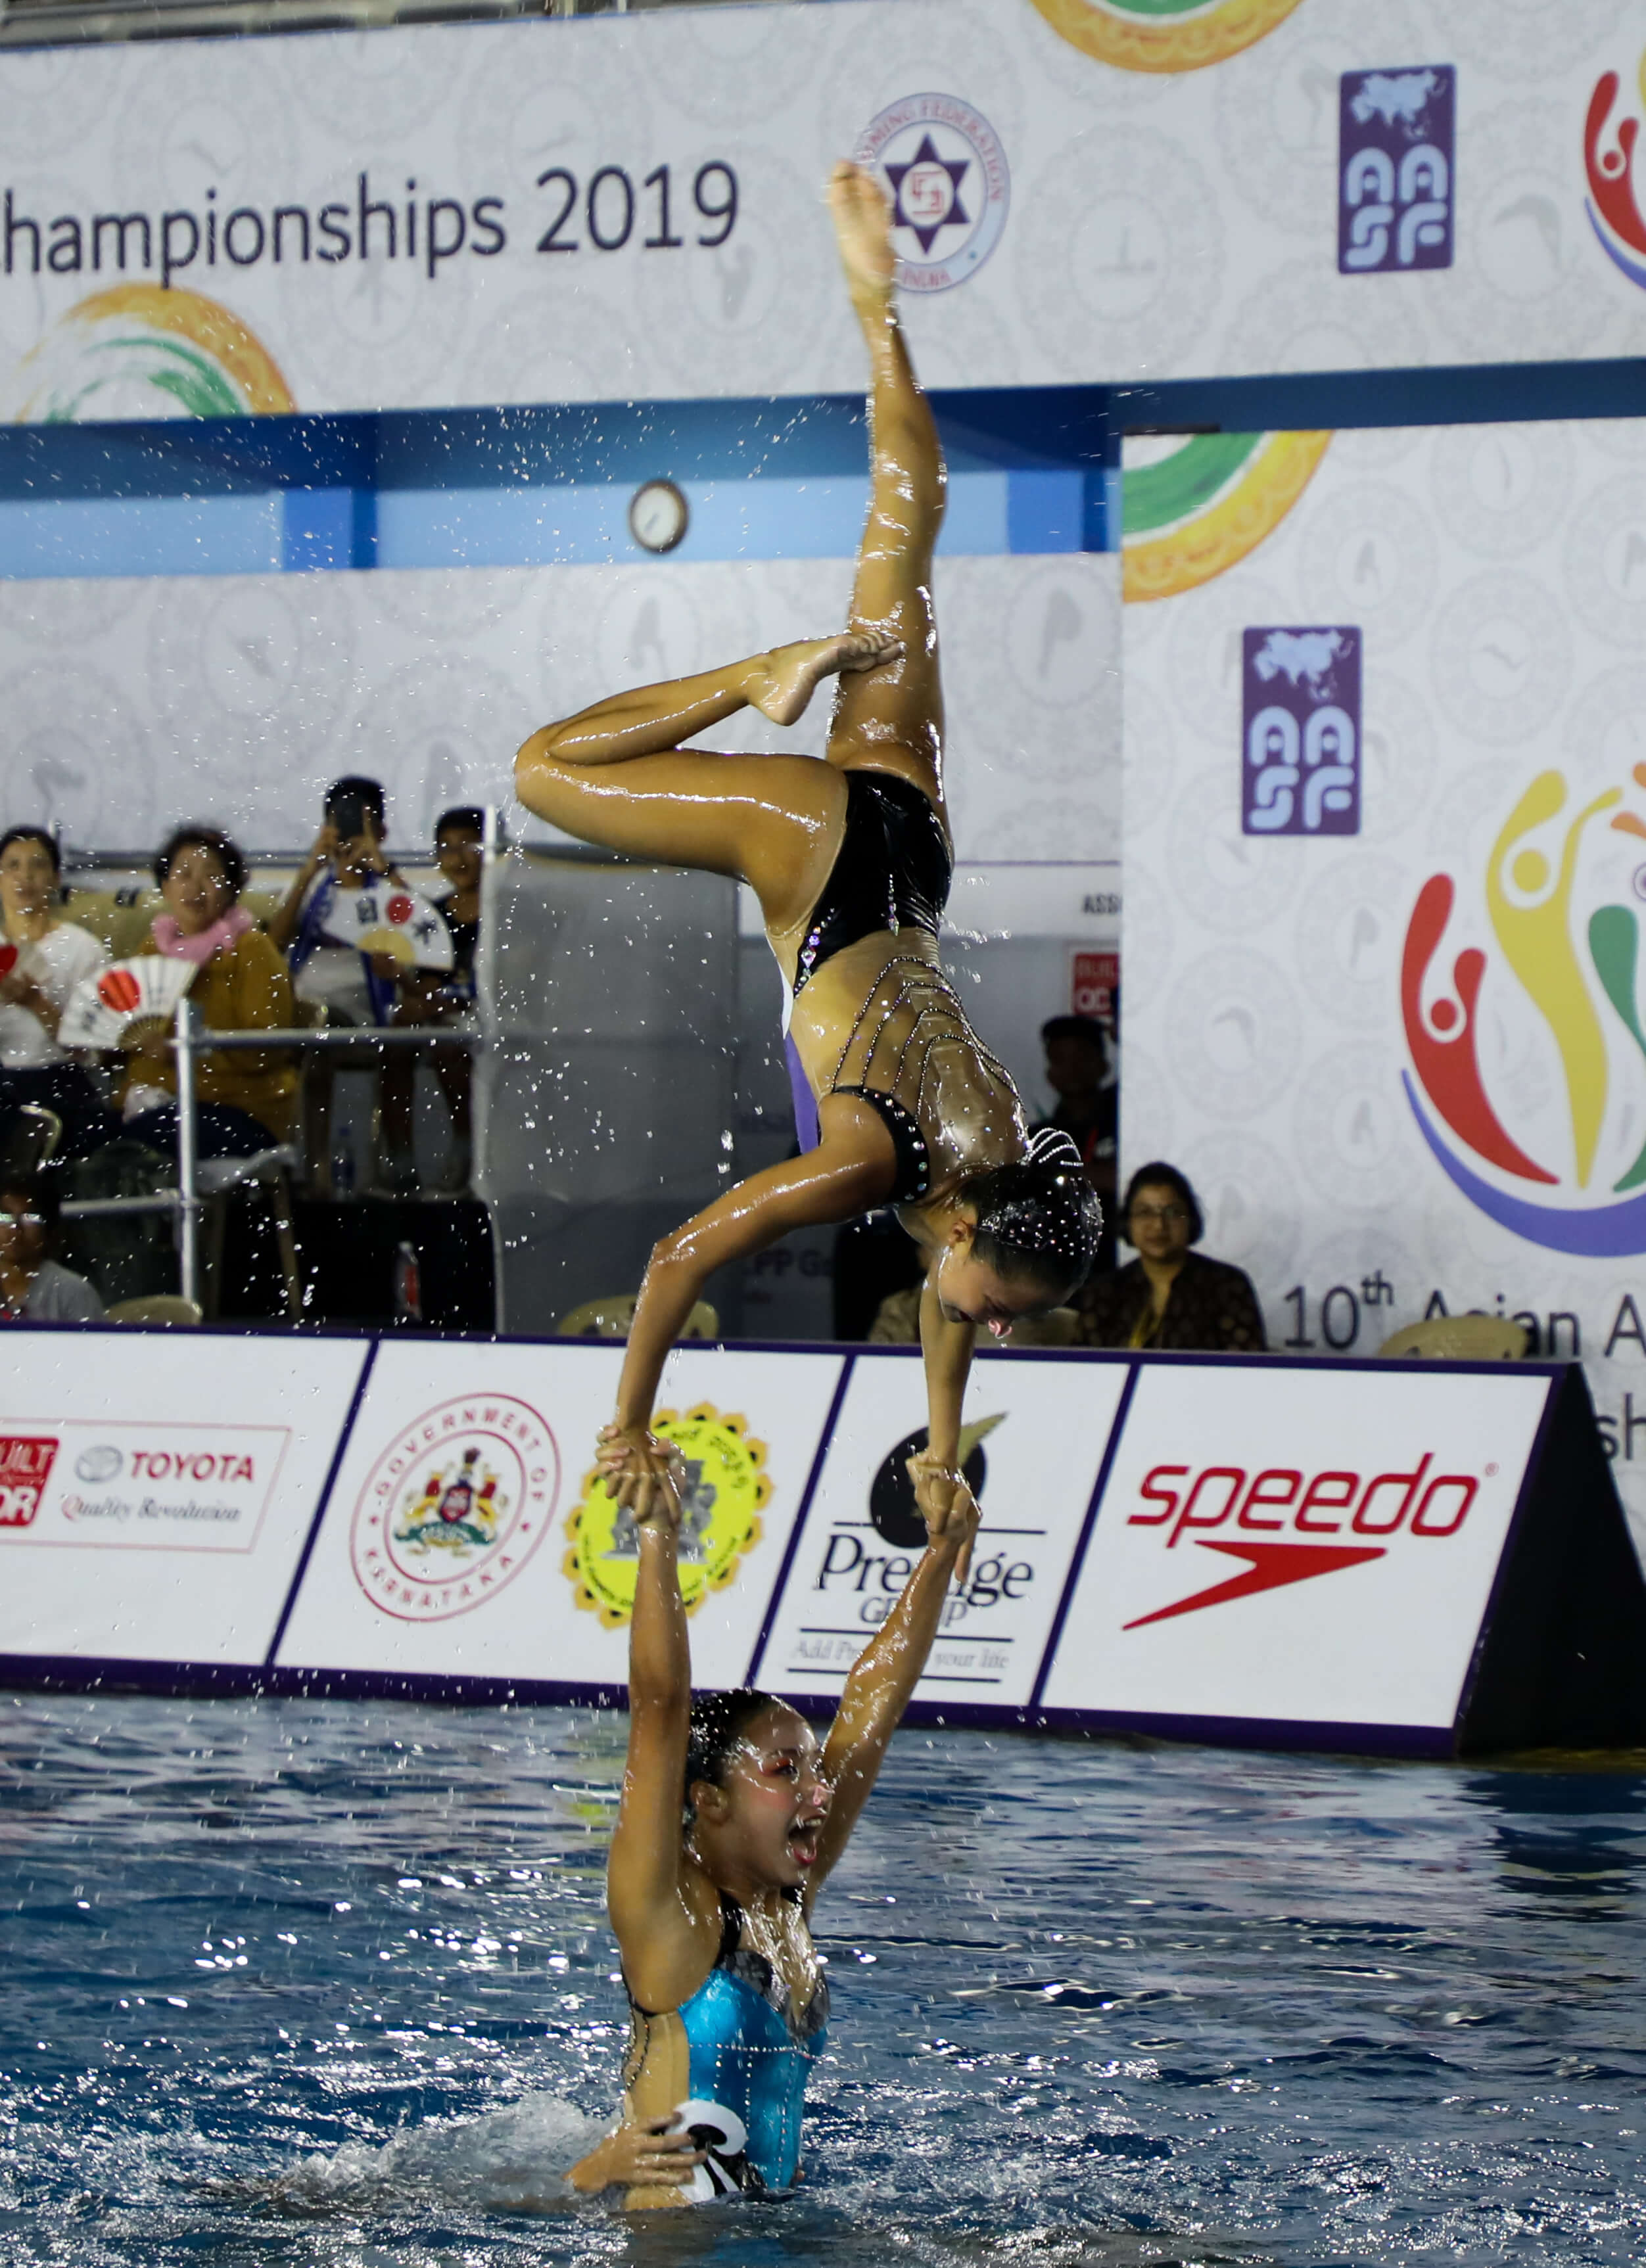 Ramananda-Siddharth pair win gold in 3m synchronised ...